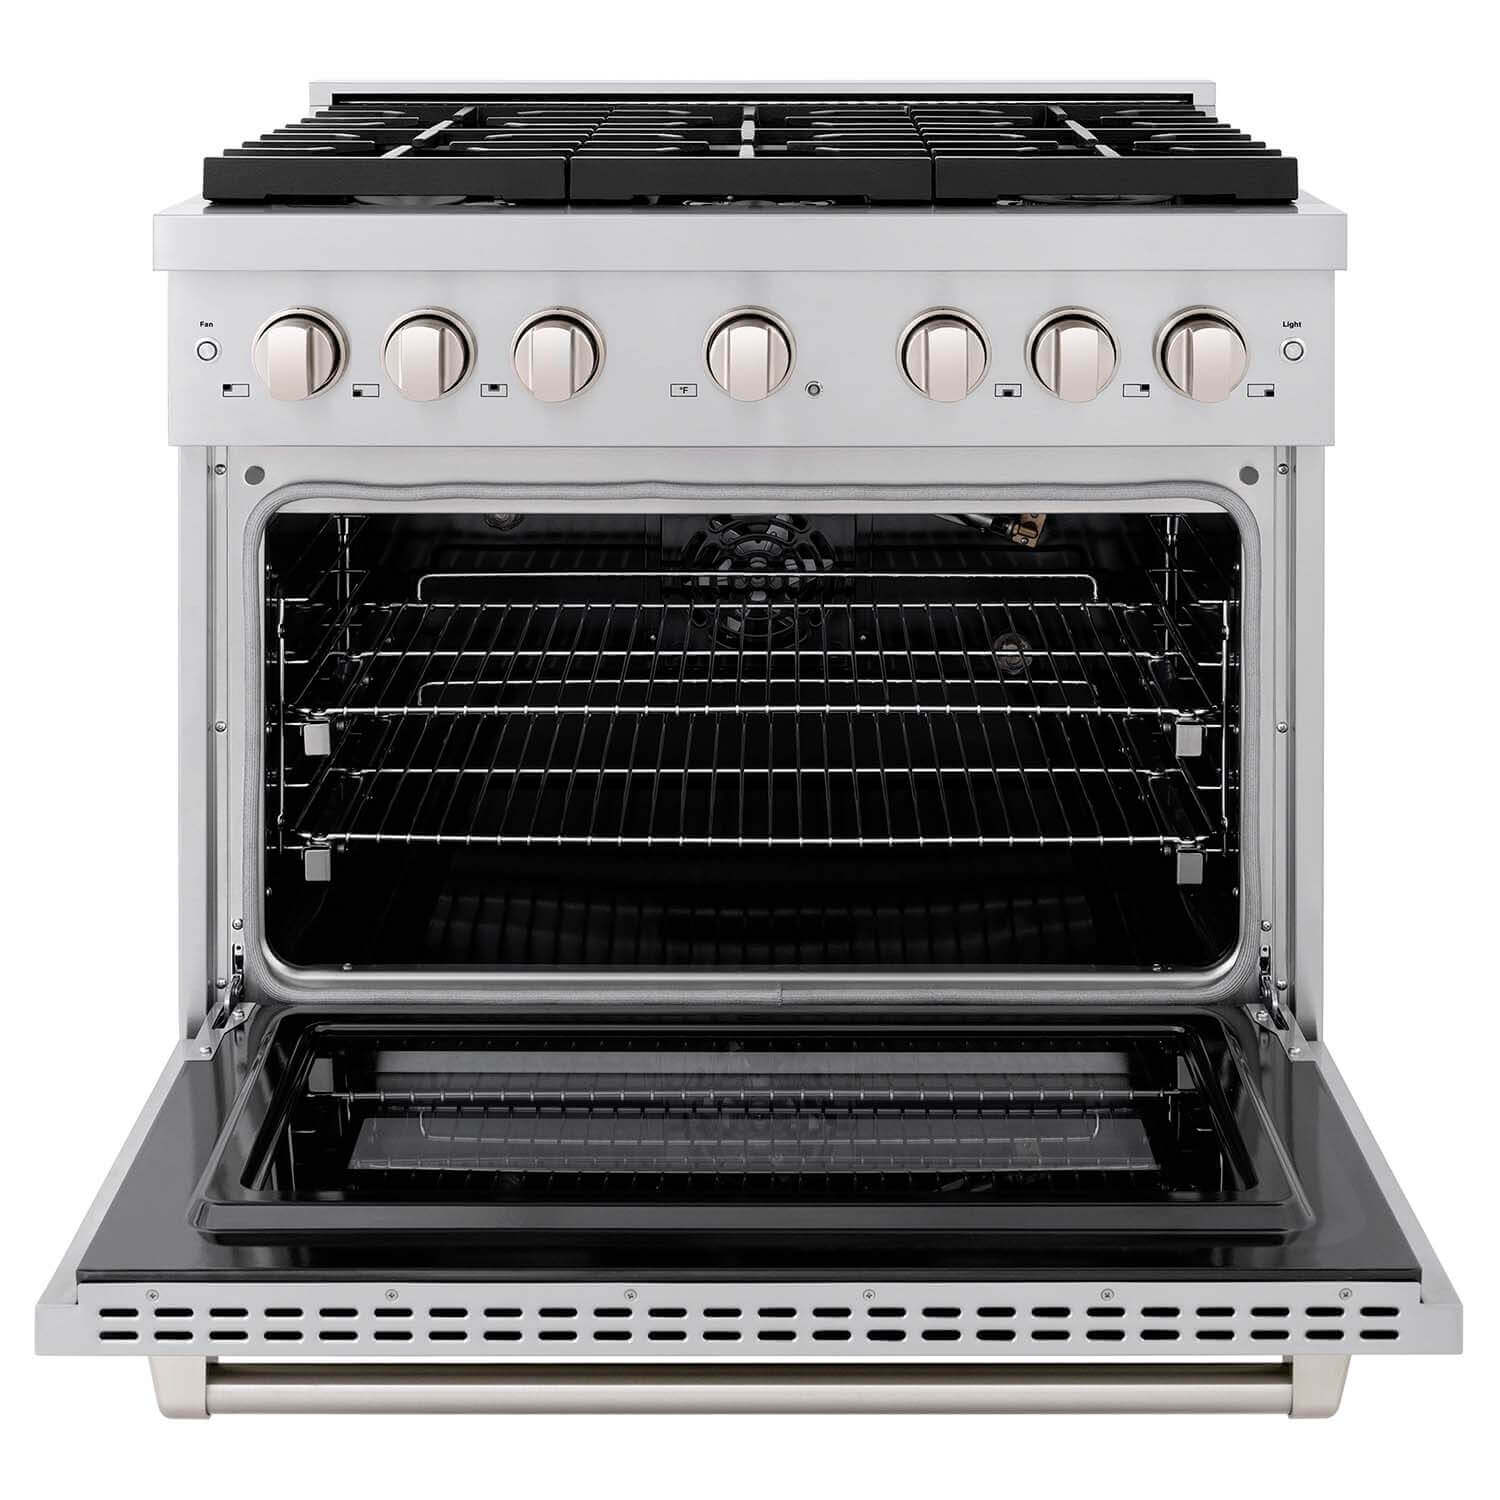 ZLINE 36 in. 5.2 cu. ft. 6 Burner Gas Range with Convection Gas Oven in Stainless Steel (SGR36) front, oven open.